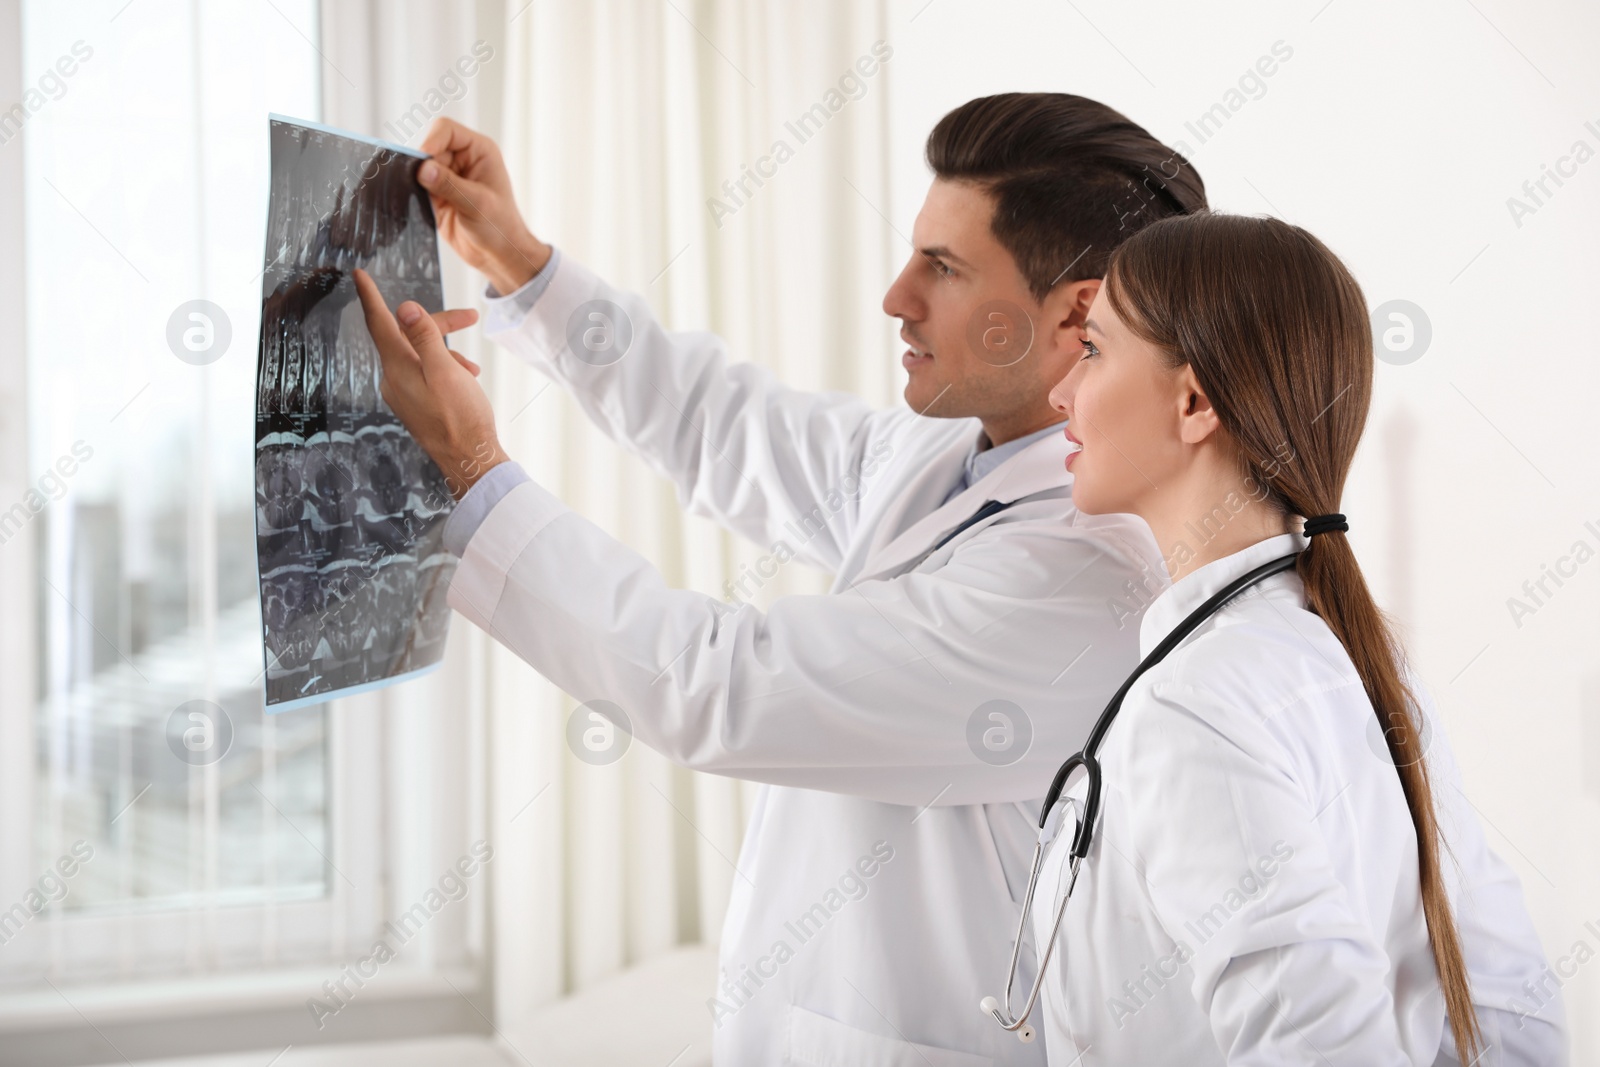 Photo of Orthopedists examining X-ray picture near window in office